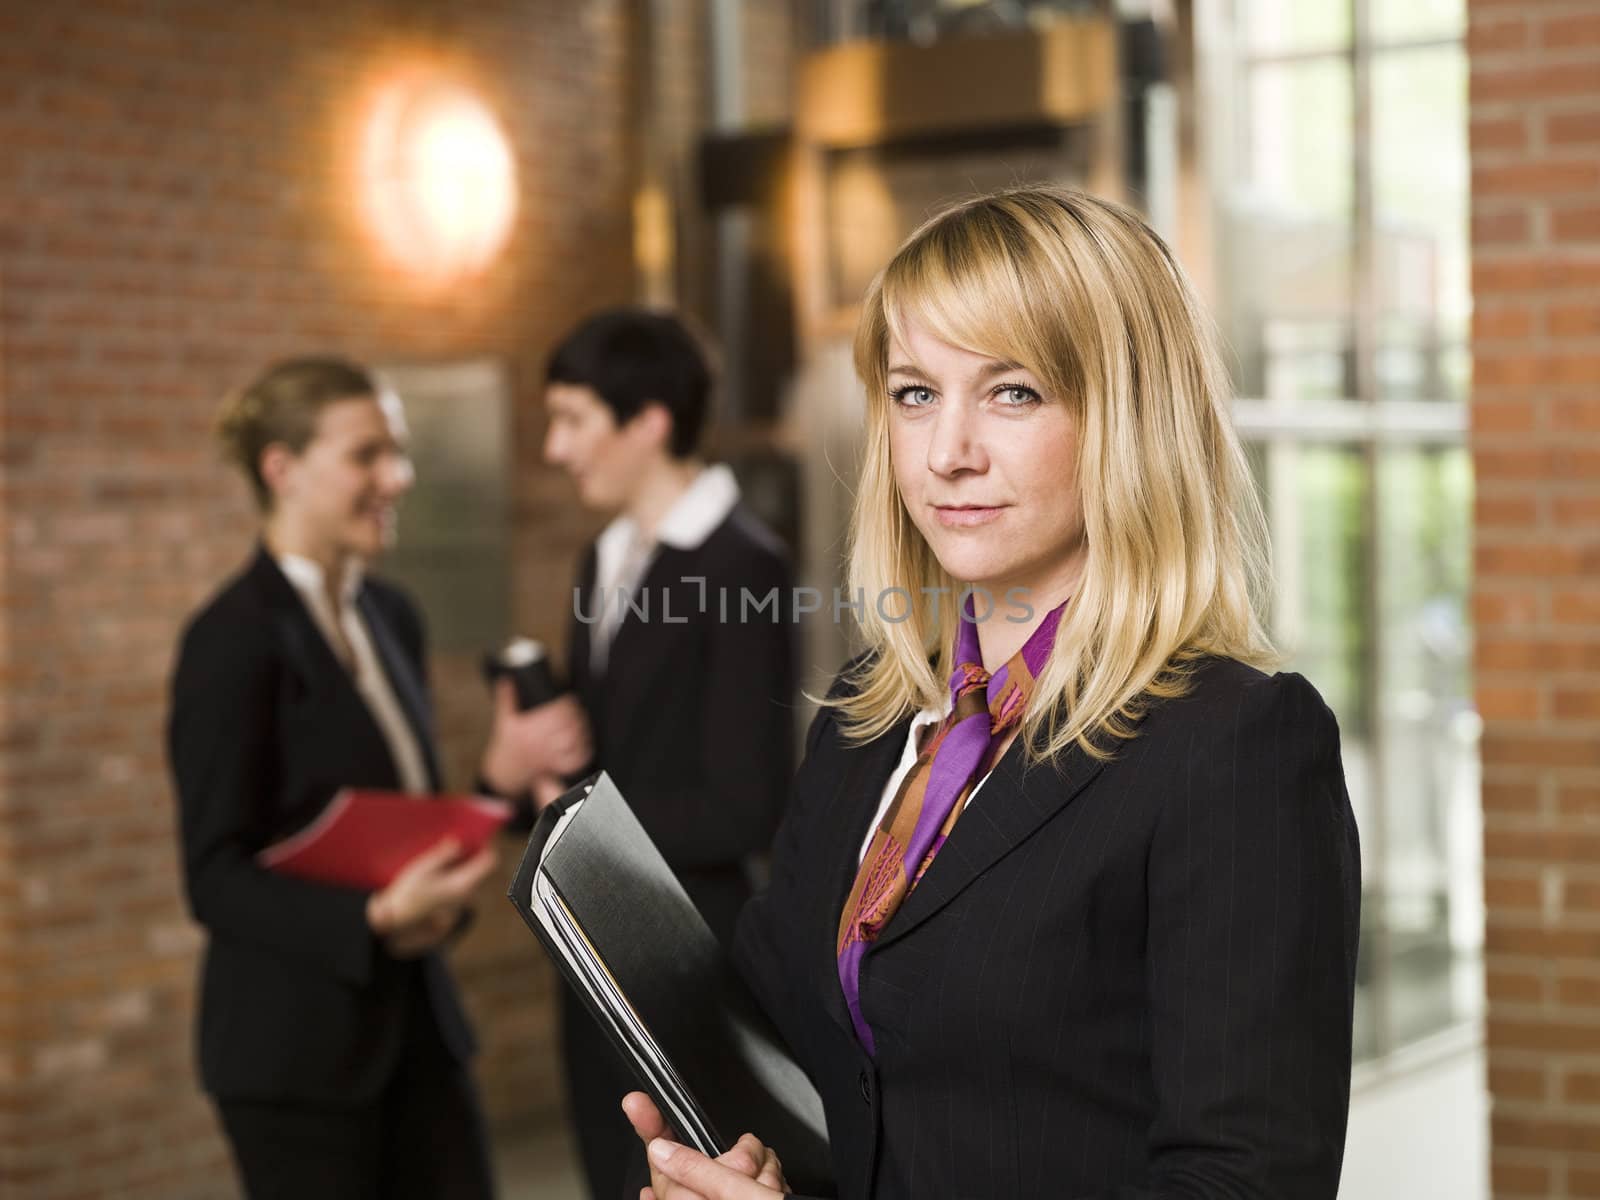 Businesswoman in front of two women